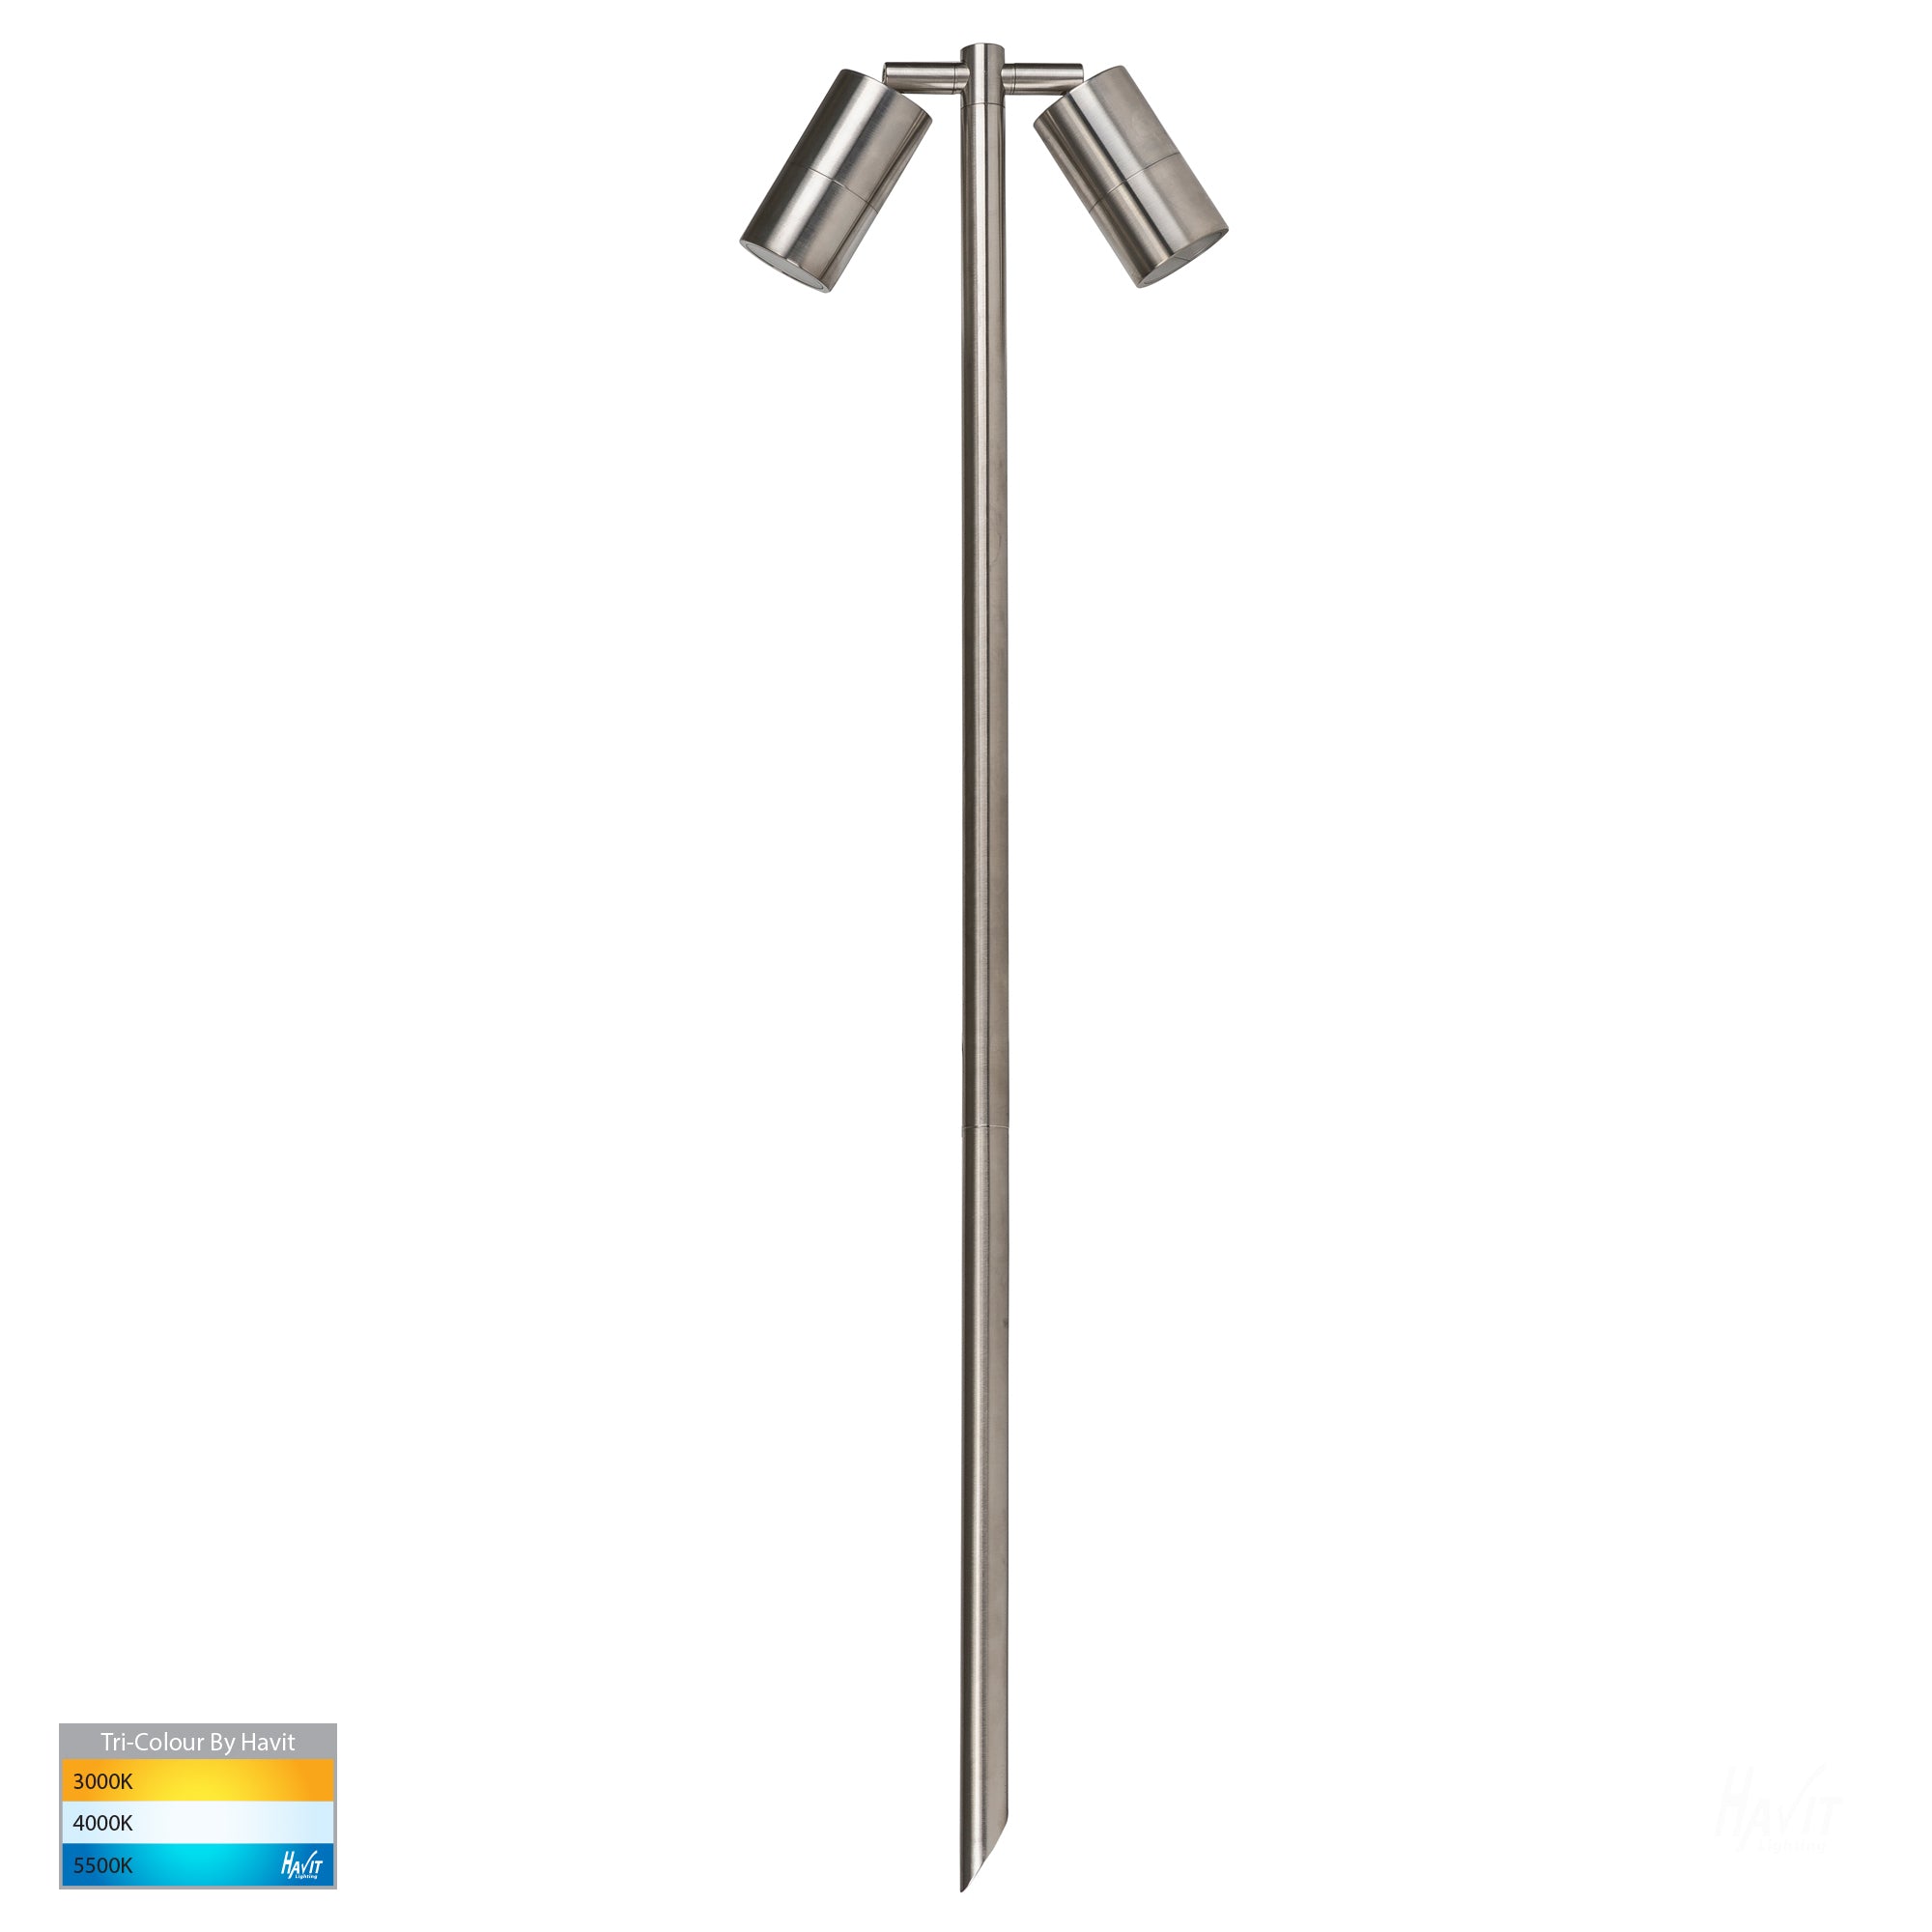 HV1405T-SS316 - Tivah 316 Stainless Steel TRI Colour Double Adjustable LED Bollard Spike Light